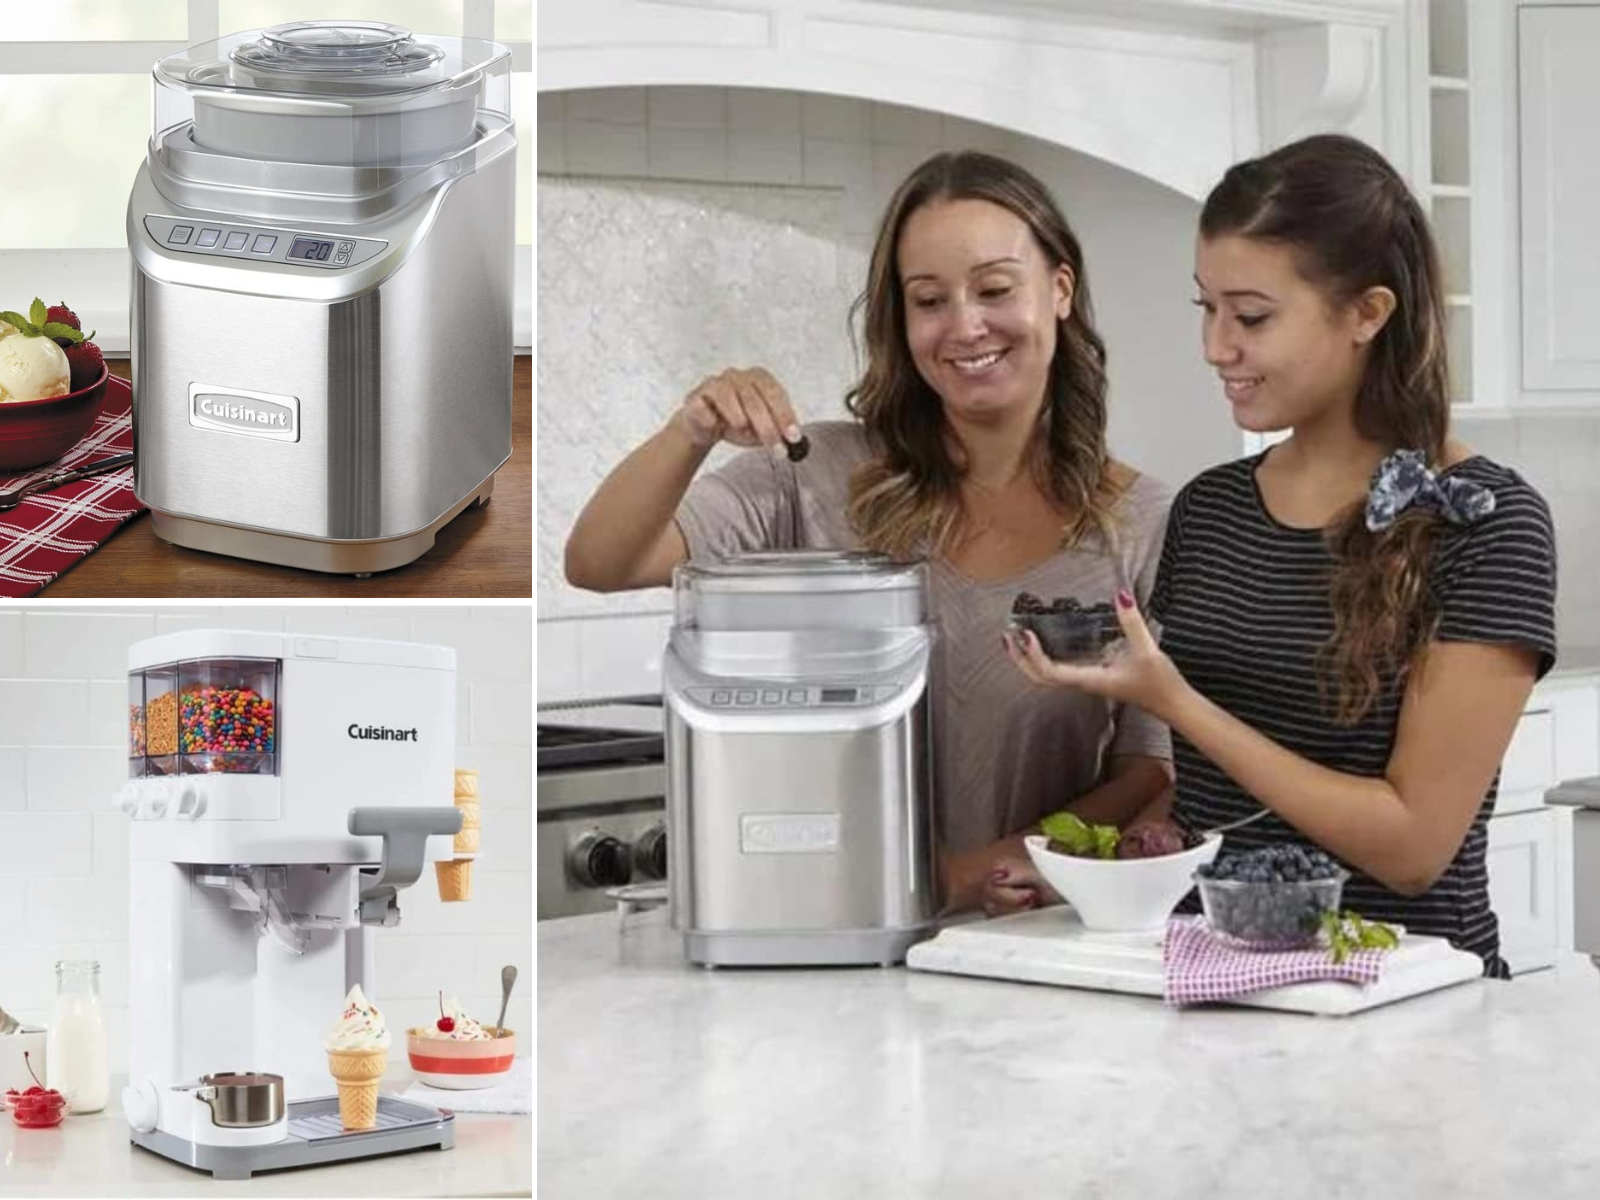 Mastering Homemade Desserts With The Cuisinart Soft Serve Ice Cream Maker